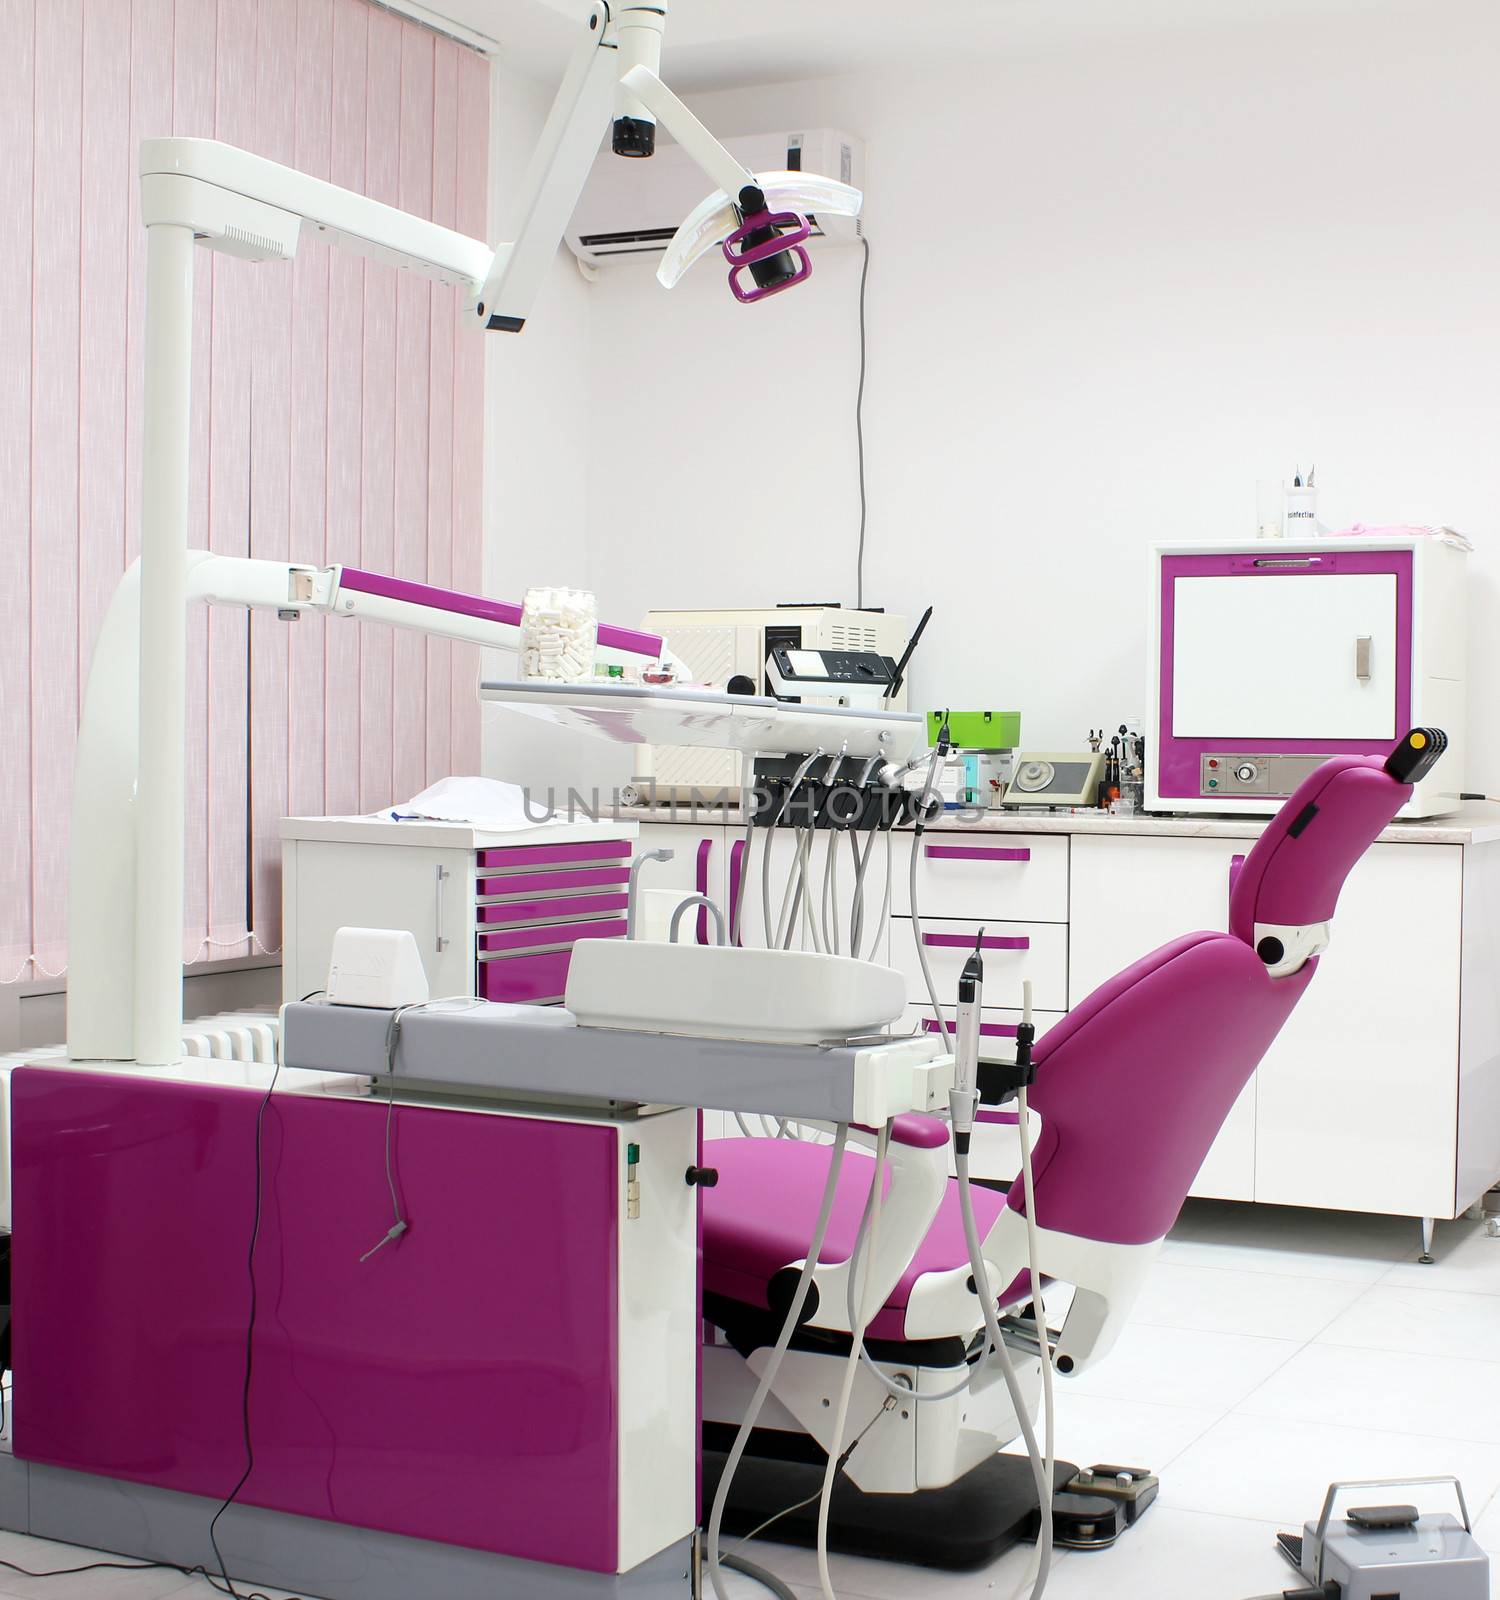 dentist office with equipment interior by goce